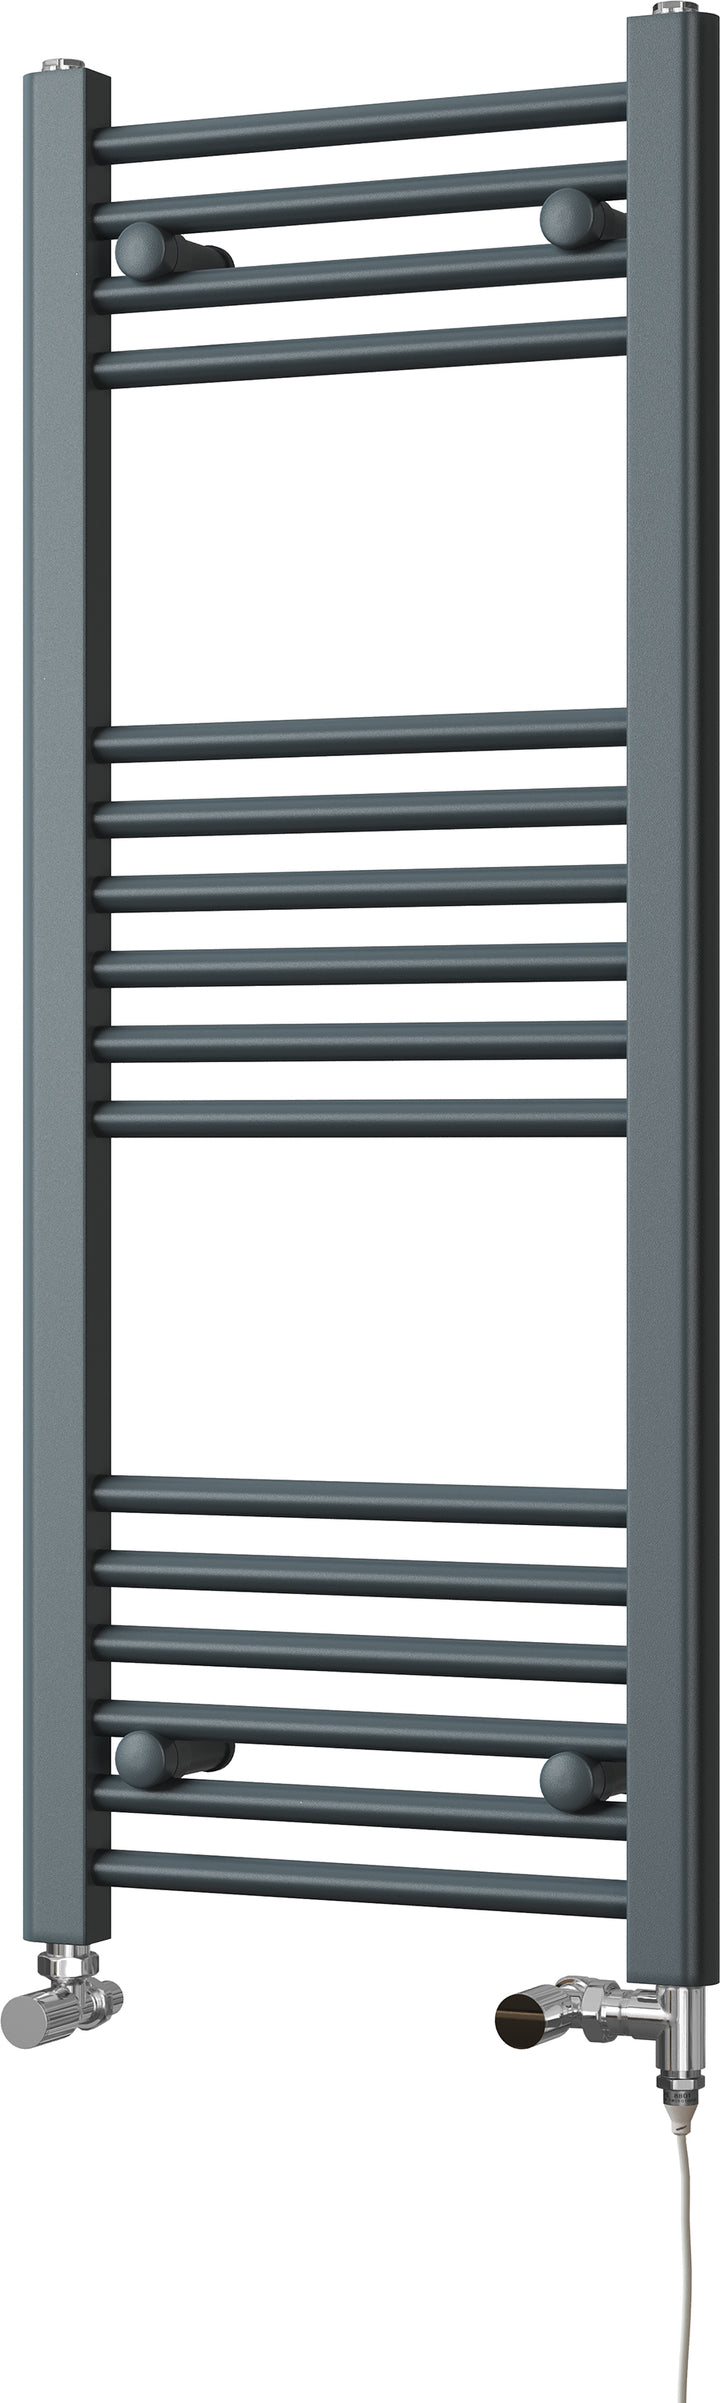 Zennor - Anthracite Dual Fuel Towel Rail  H1000mm x W400mm Standard - Straight